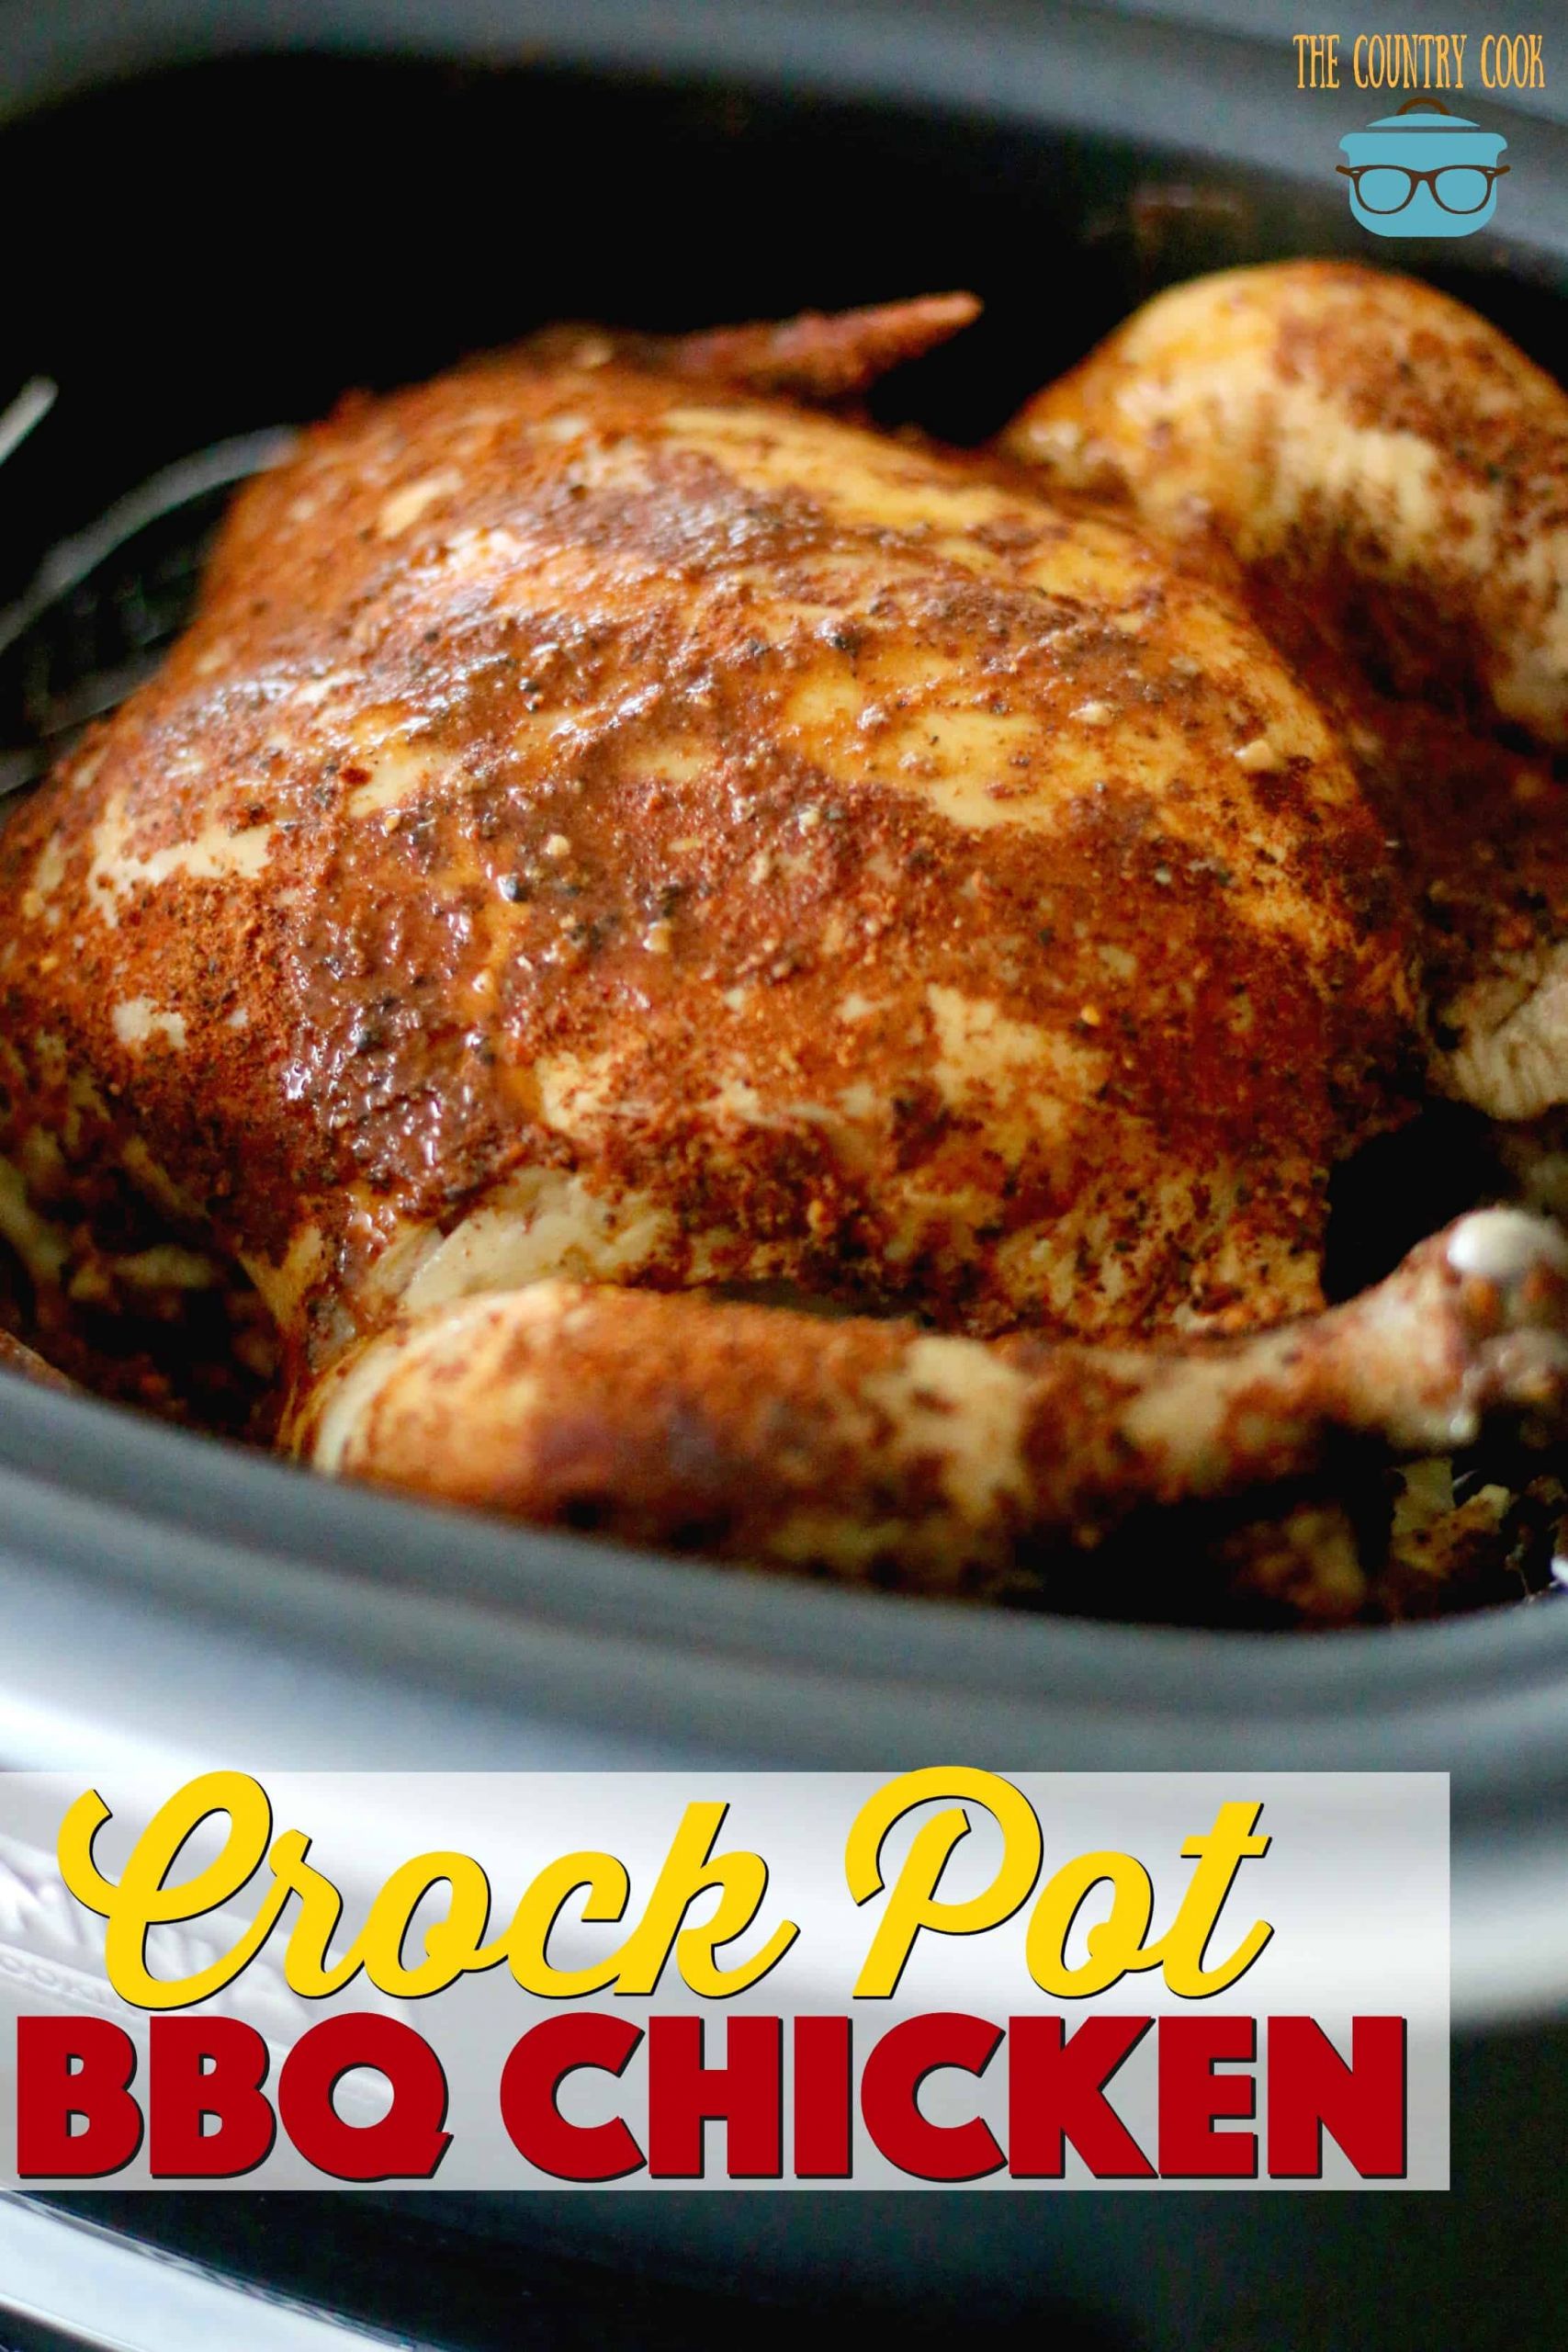 Cooking A Whole Chicken In A Crock Pot
 Crock Pot Whole BBQ Chicken The Country Cook slow cooker